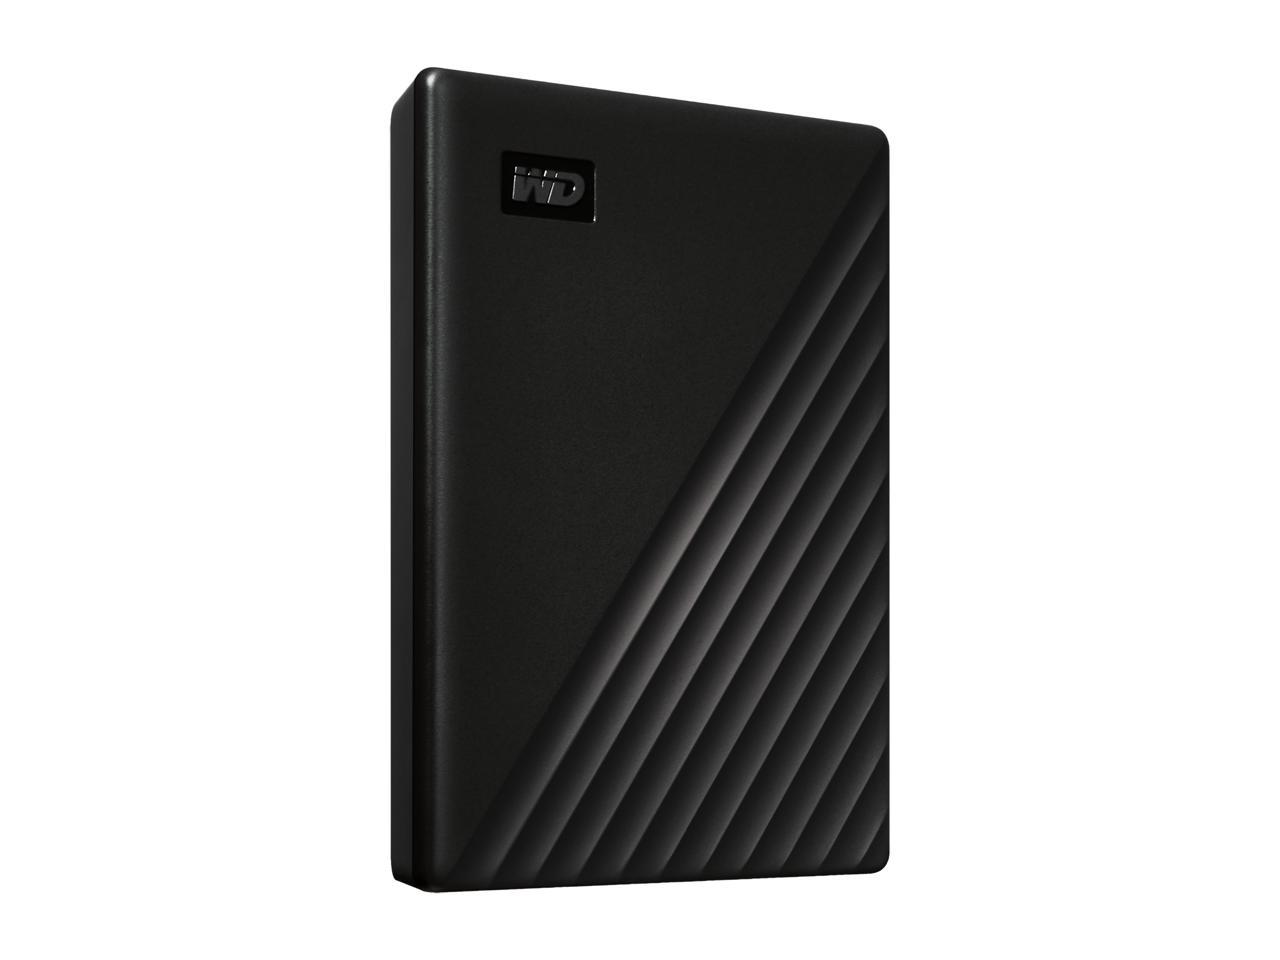 1tb external hard drive mac and pc compatible